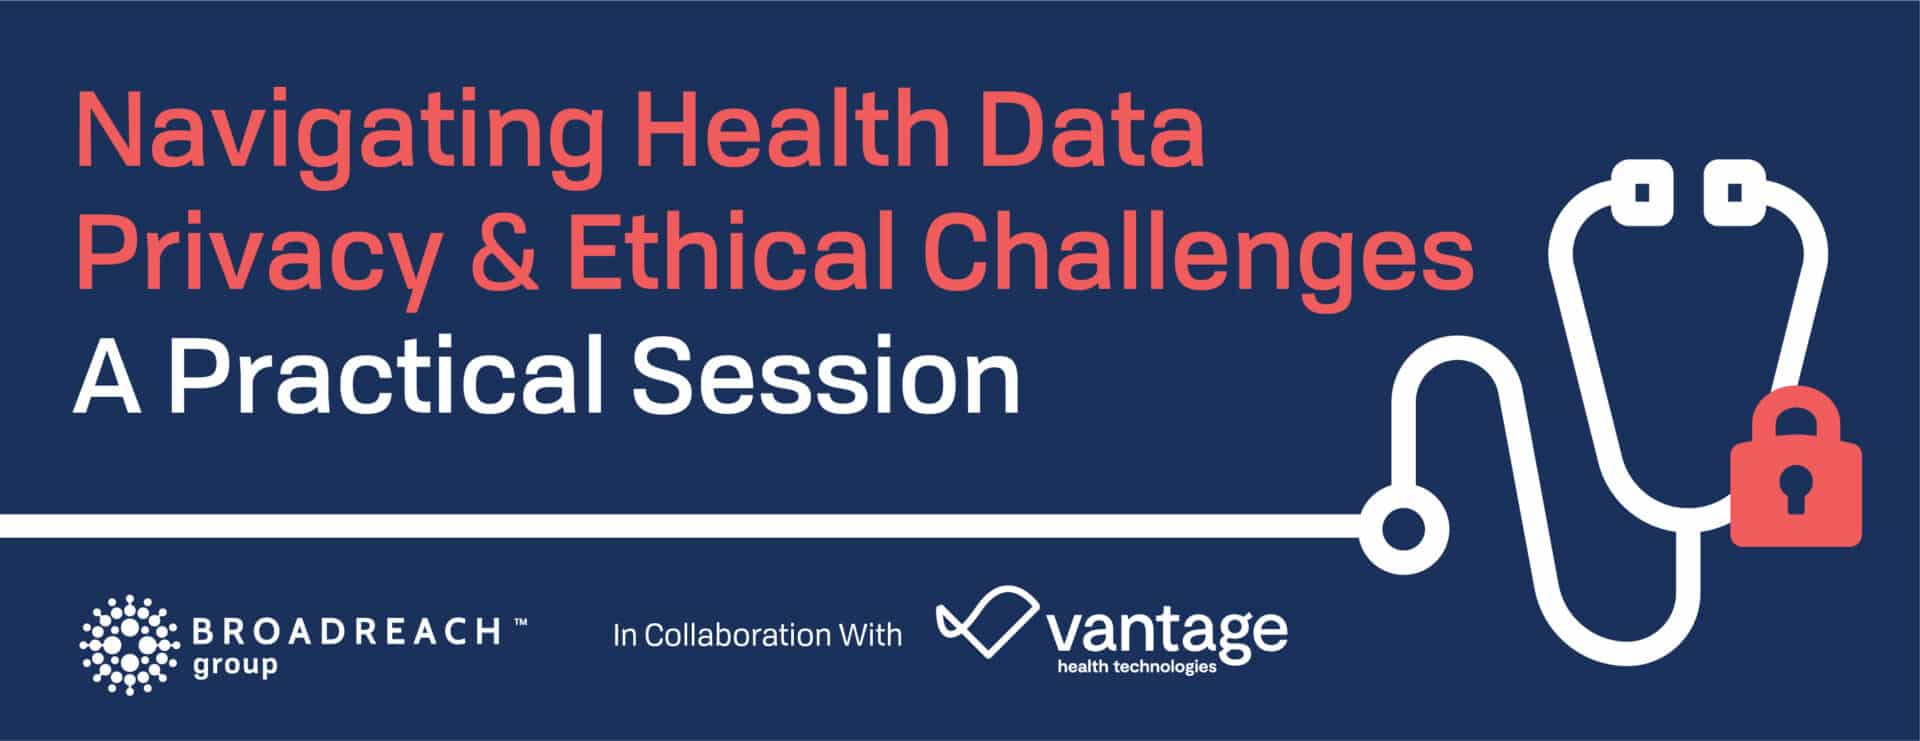 Navigating Health Data Privacy & Ethical Challenges: A Practical Session